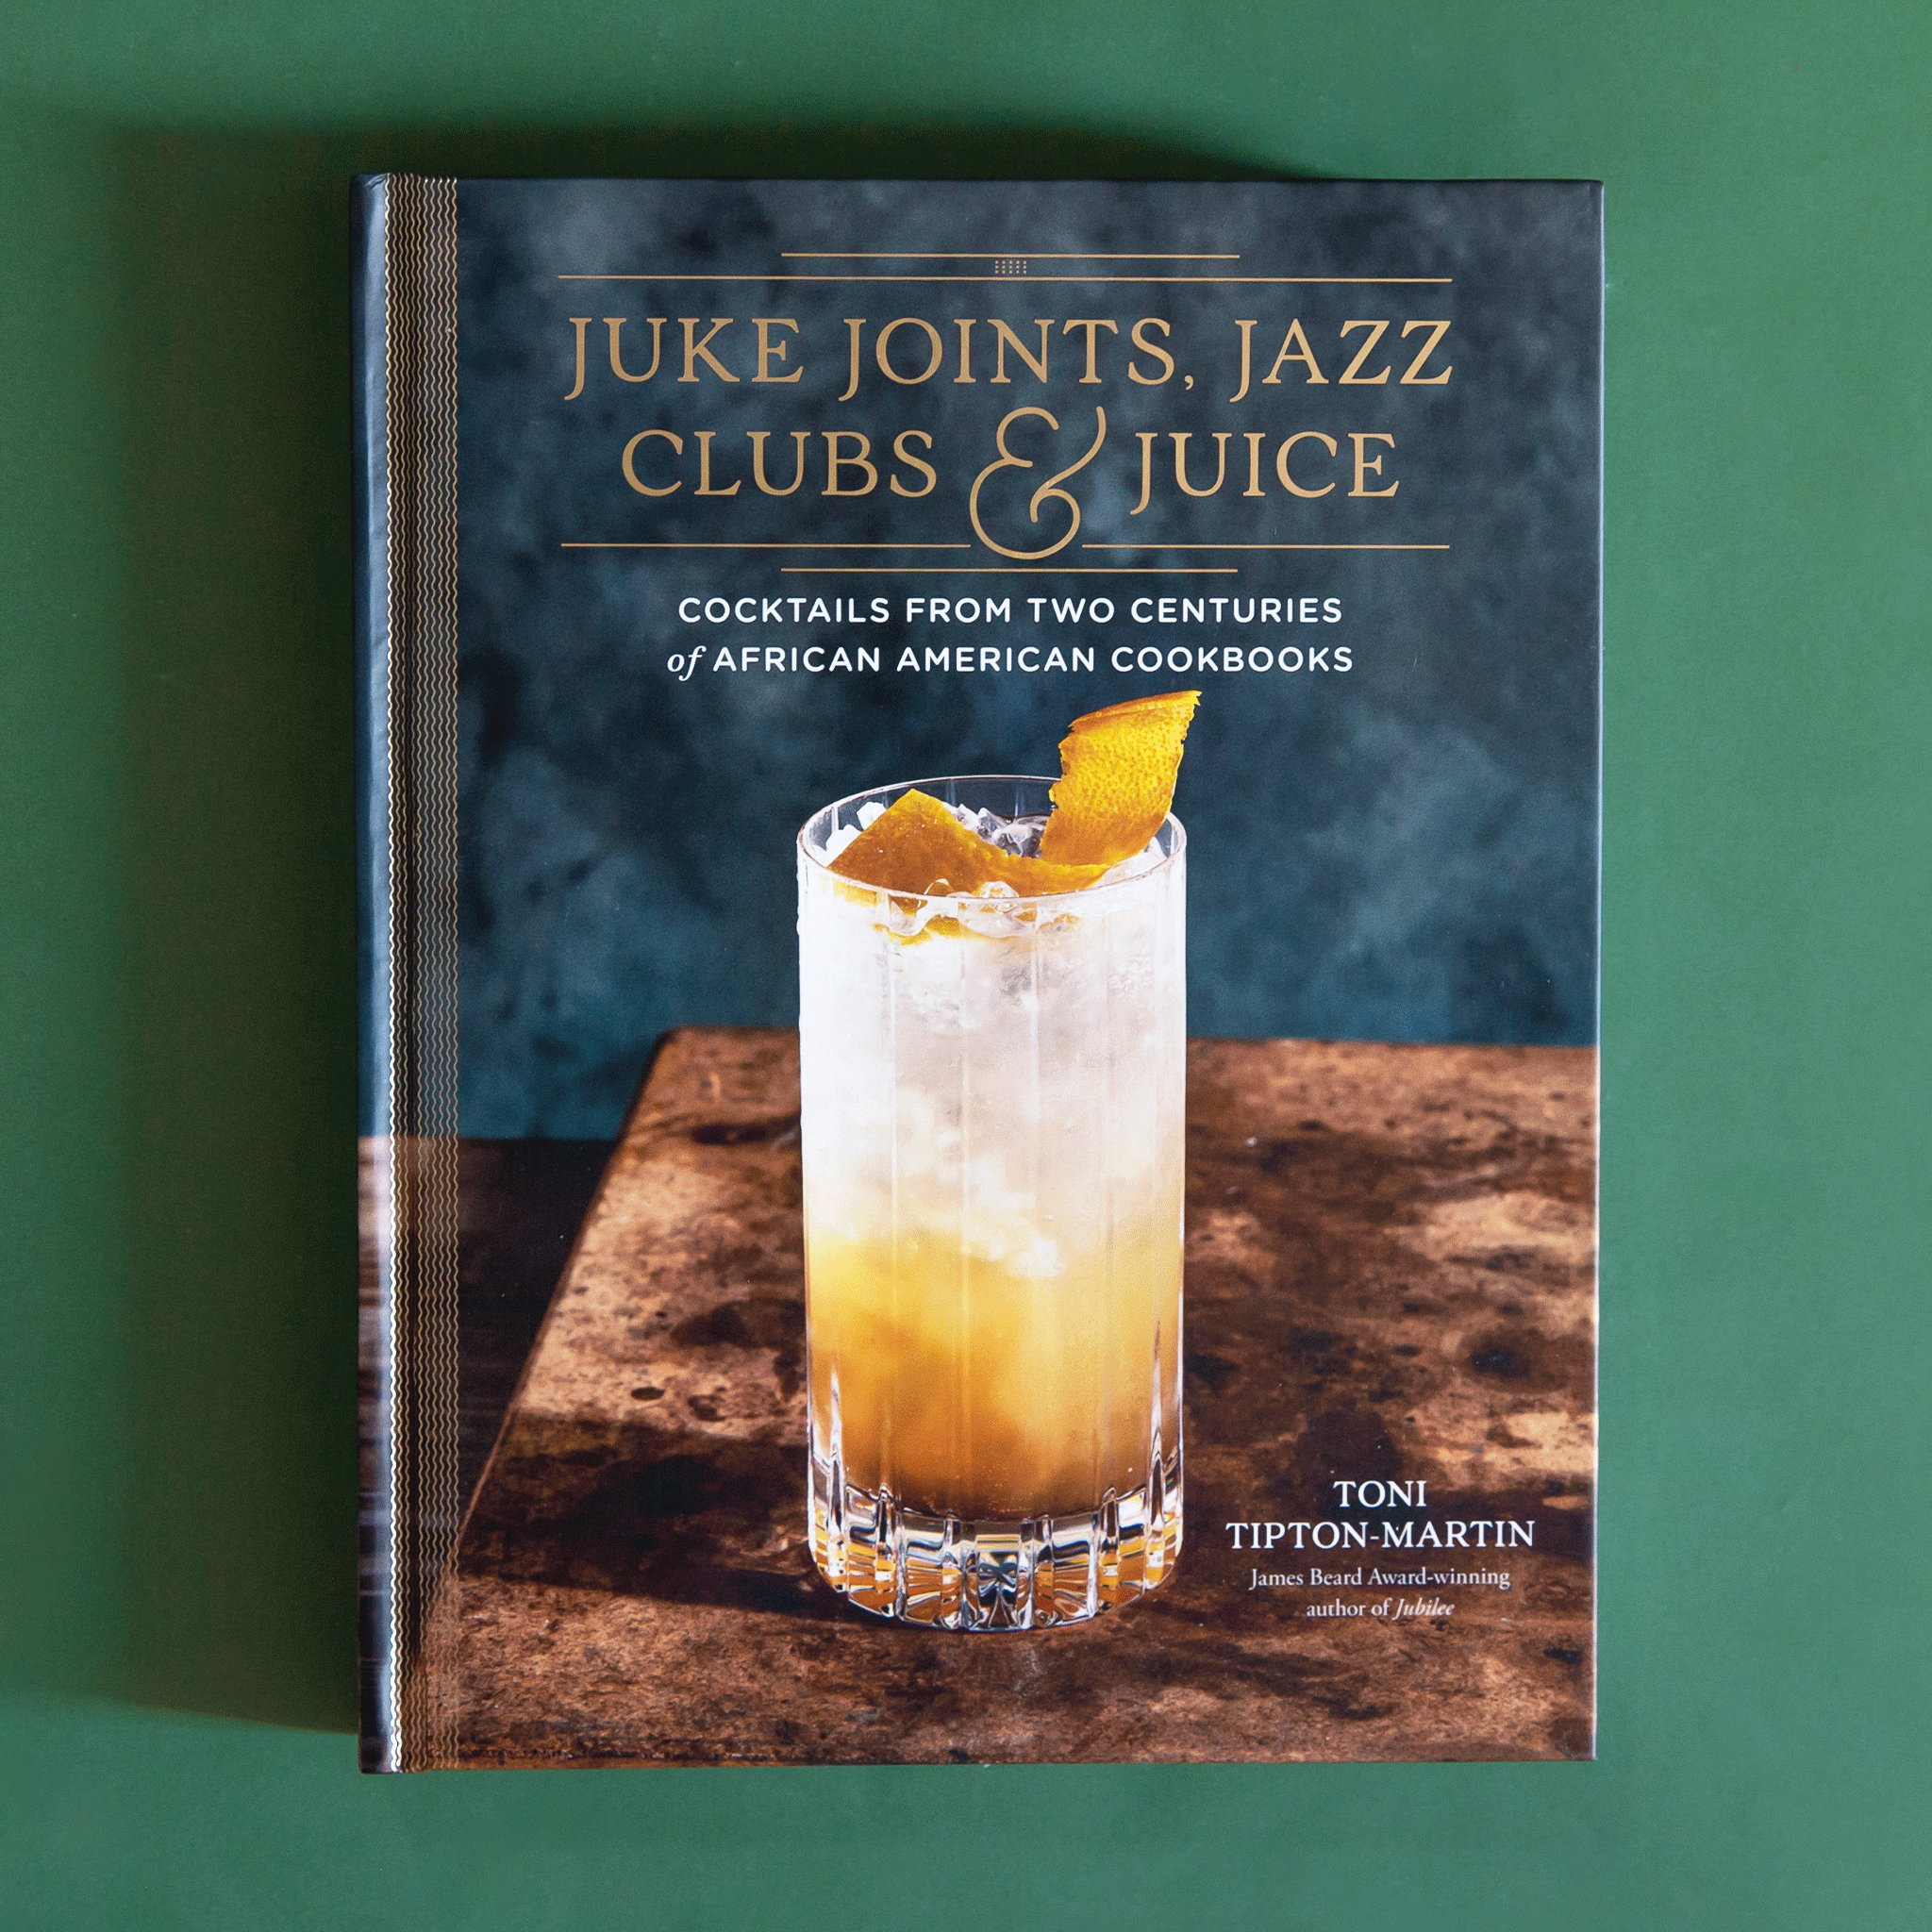 On a green background is a grey and brown book cover with a yellow cocktail and gold text that reads, "Juke Joints, Jazz Clubs & Juice", "Cocktails From Two Centuries of African American Cookbooks".